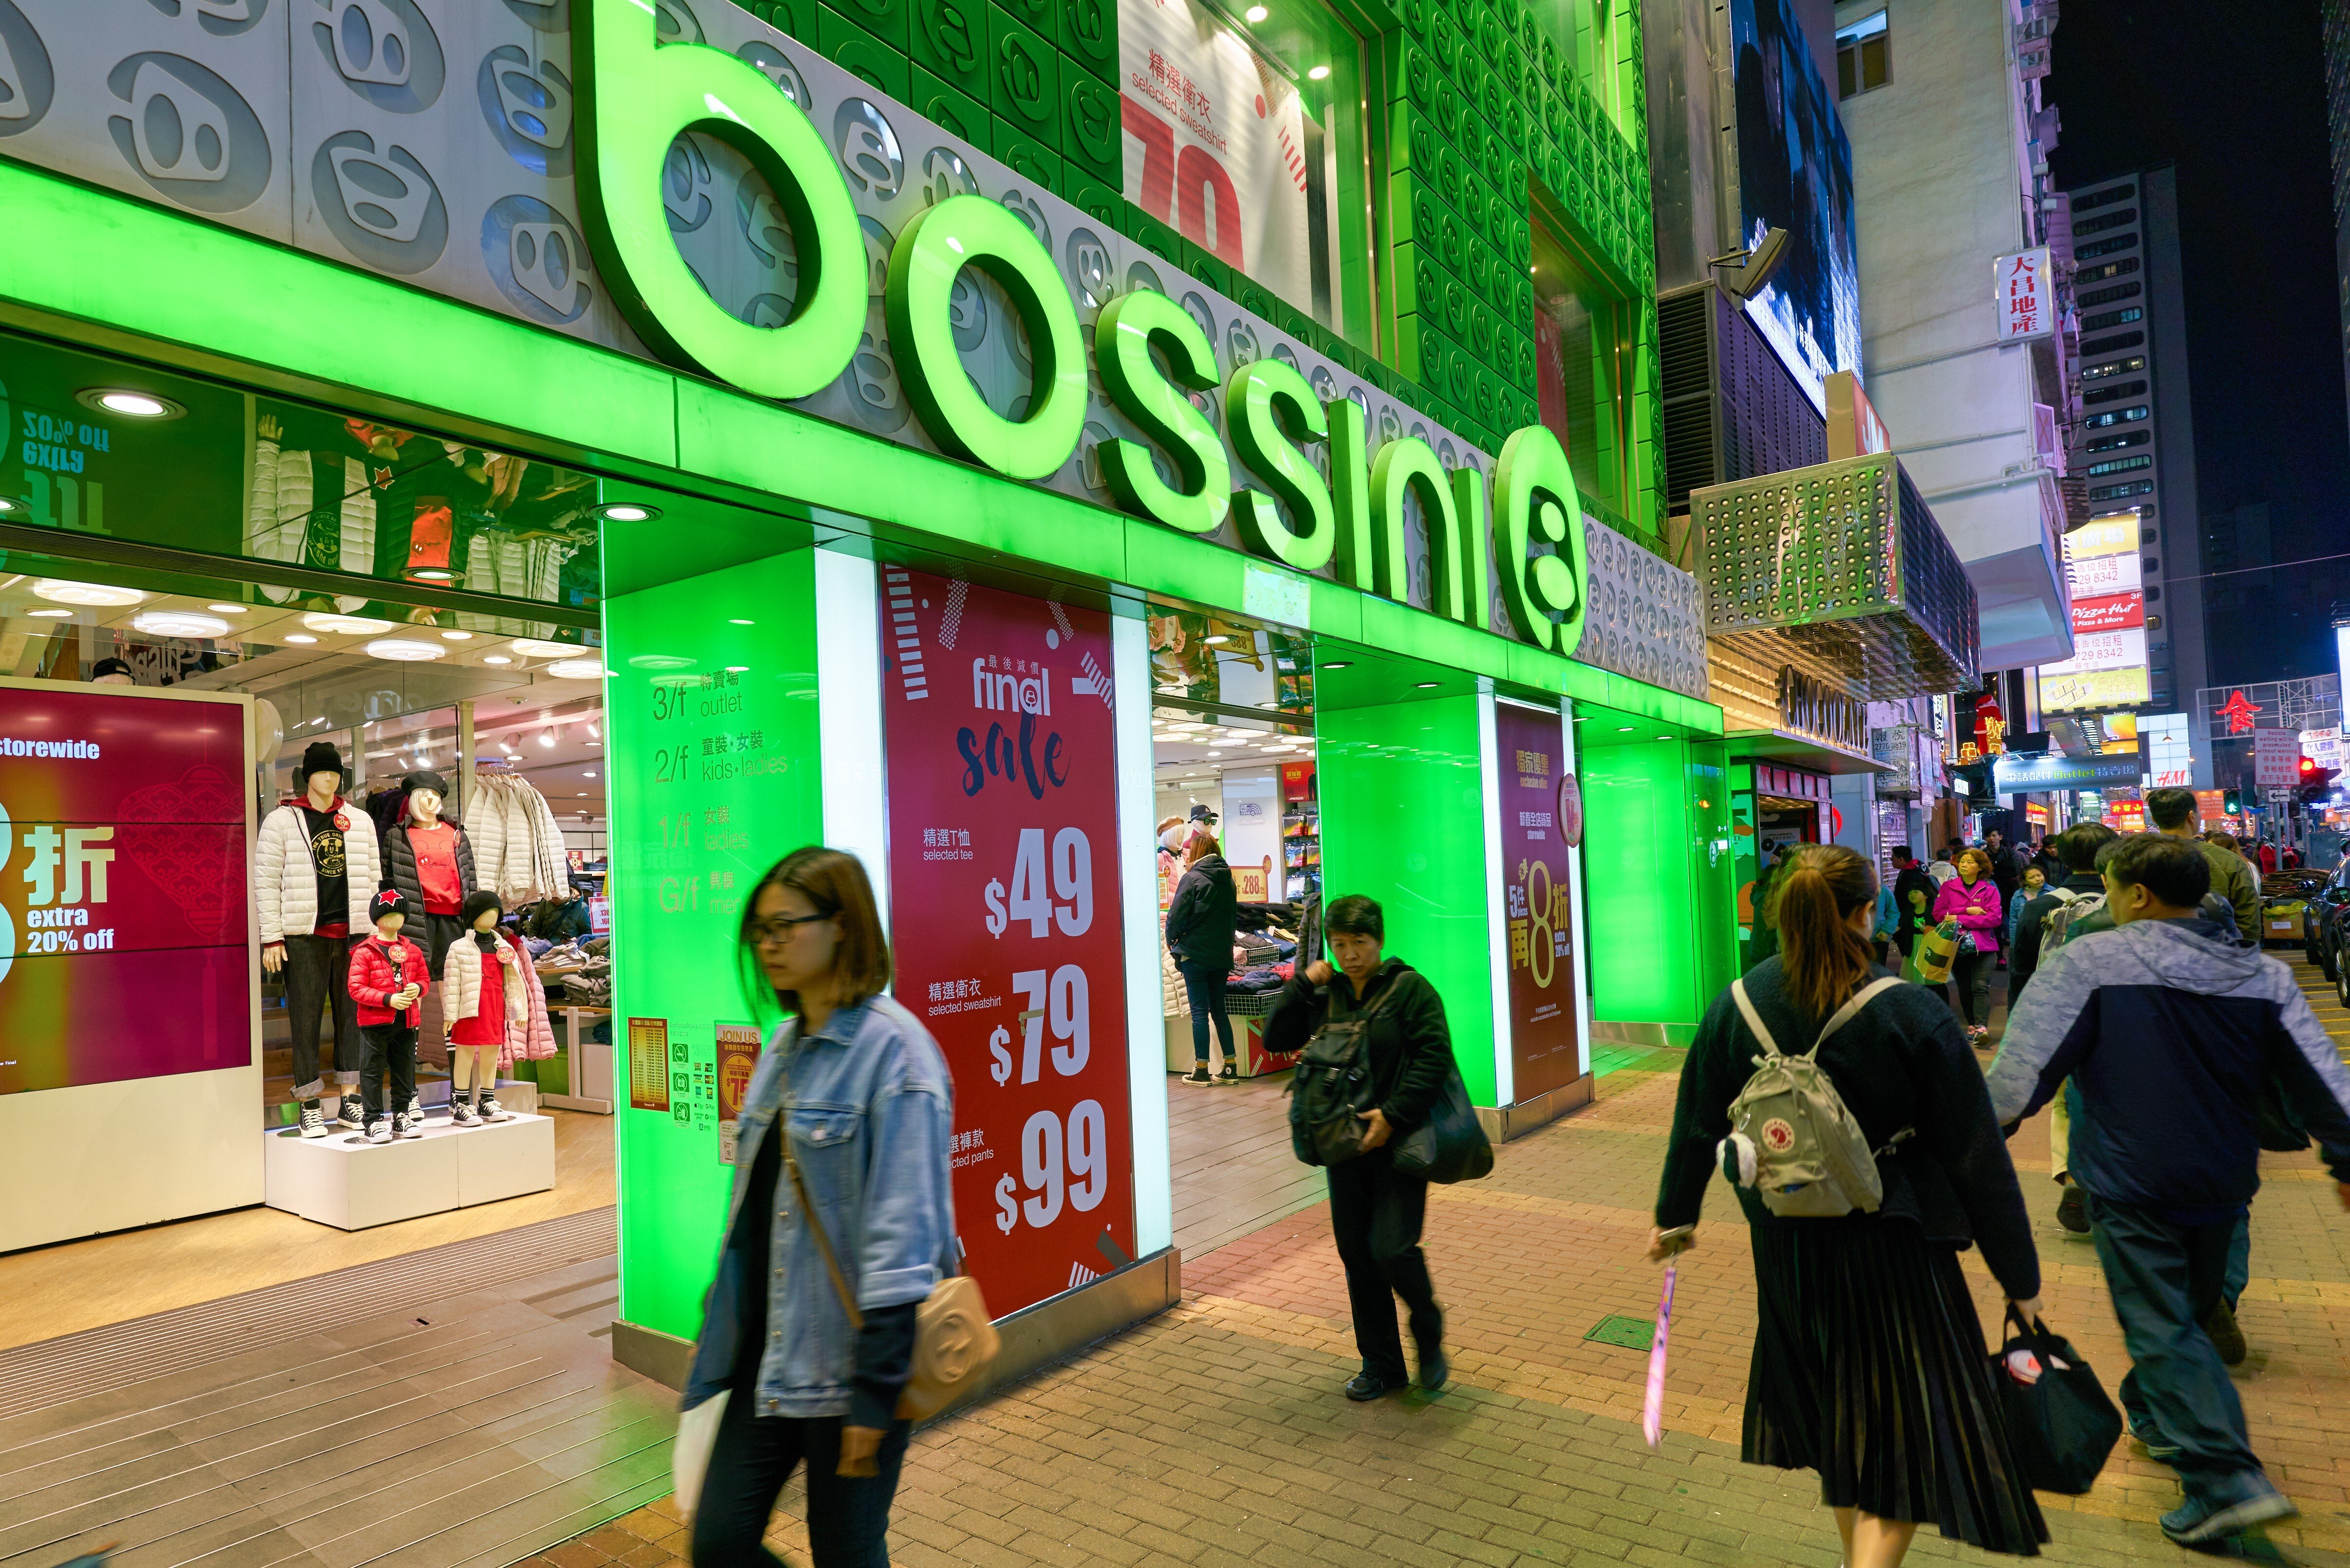 Bossini operates 39 shops in Hong Kong and Macau, and 180 in mainland China. Photo: Shutterstock